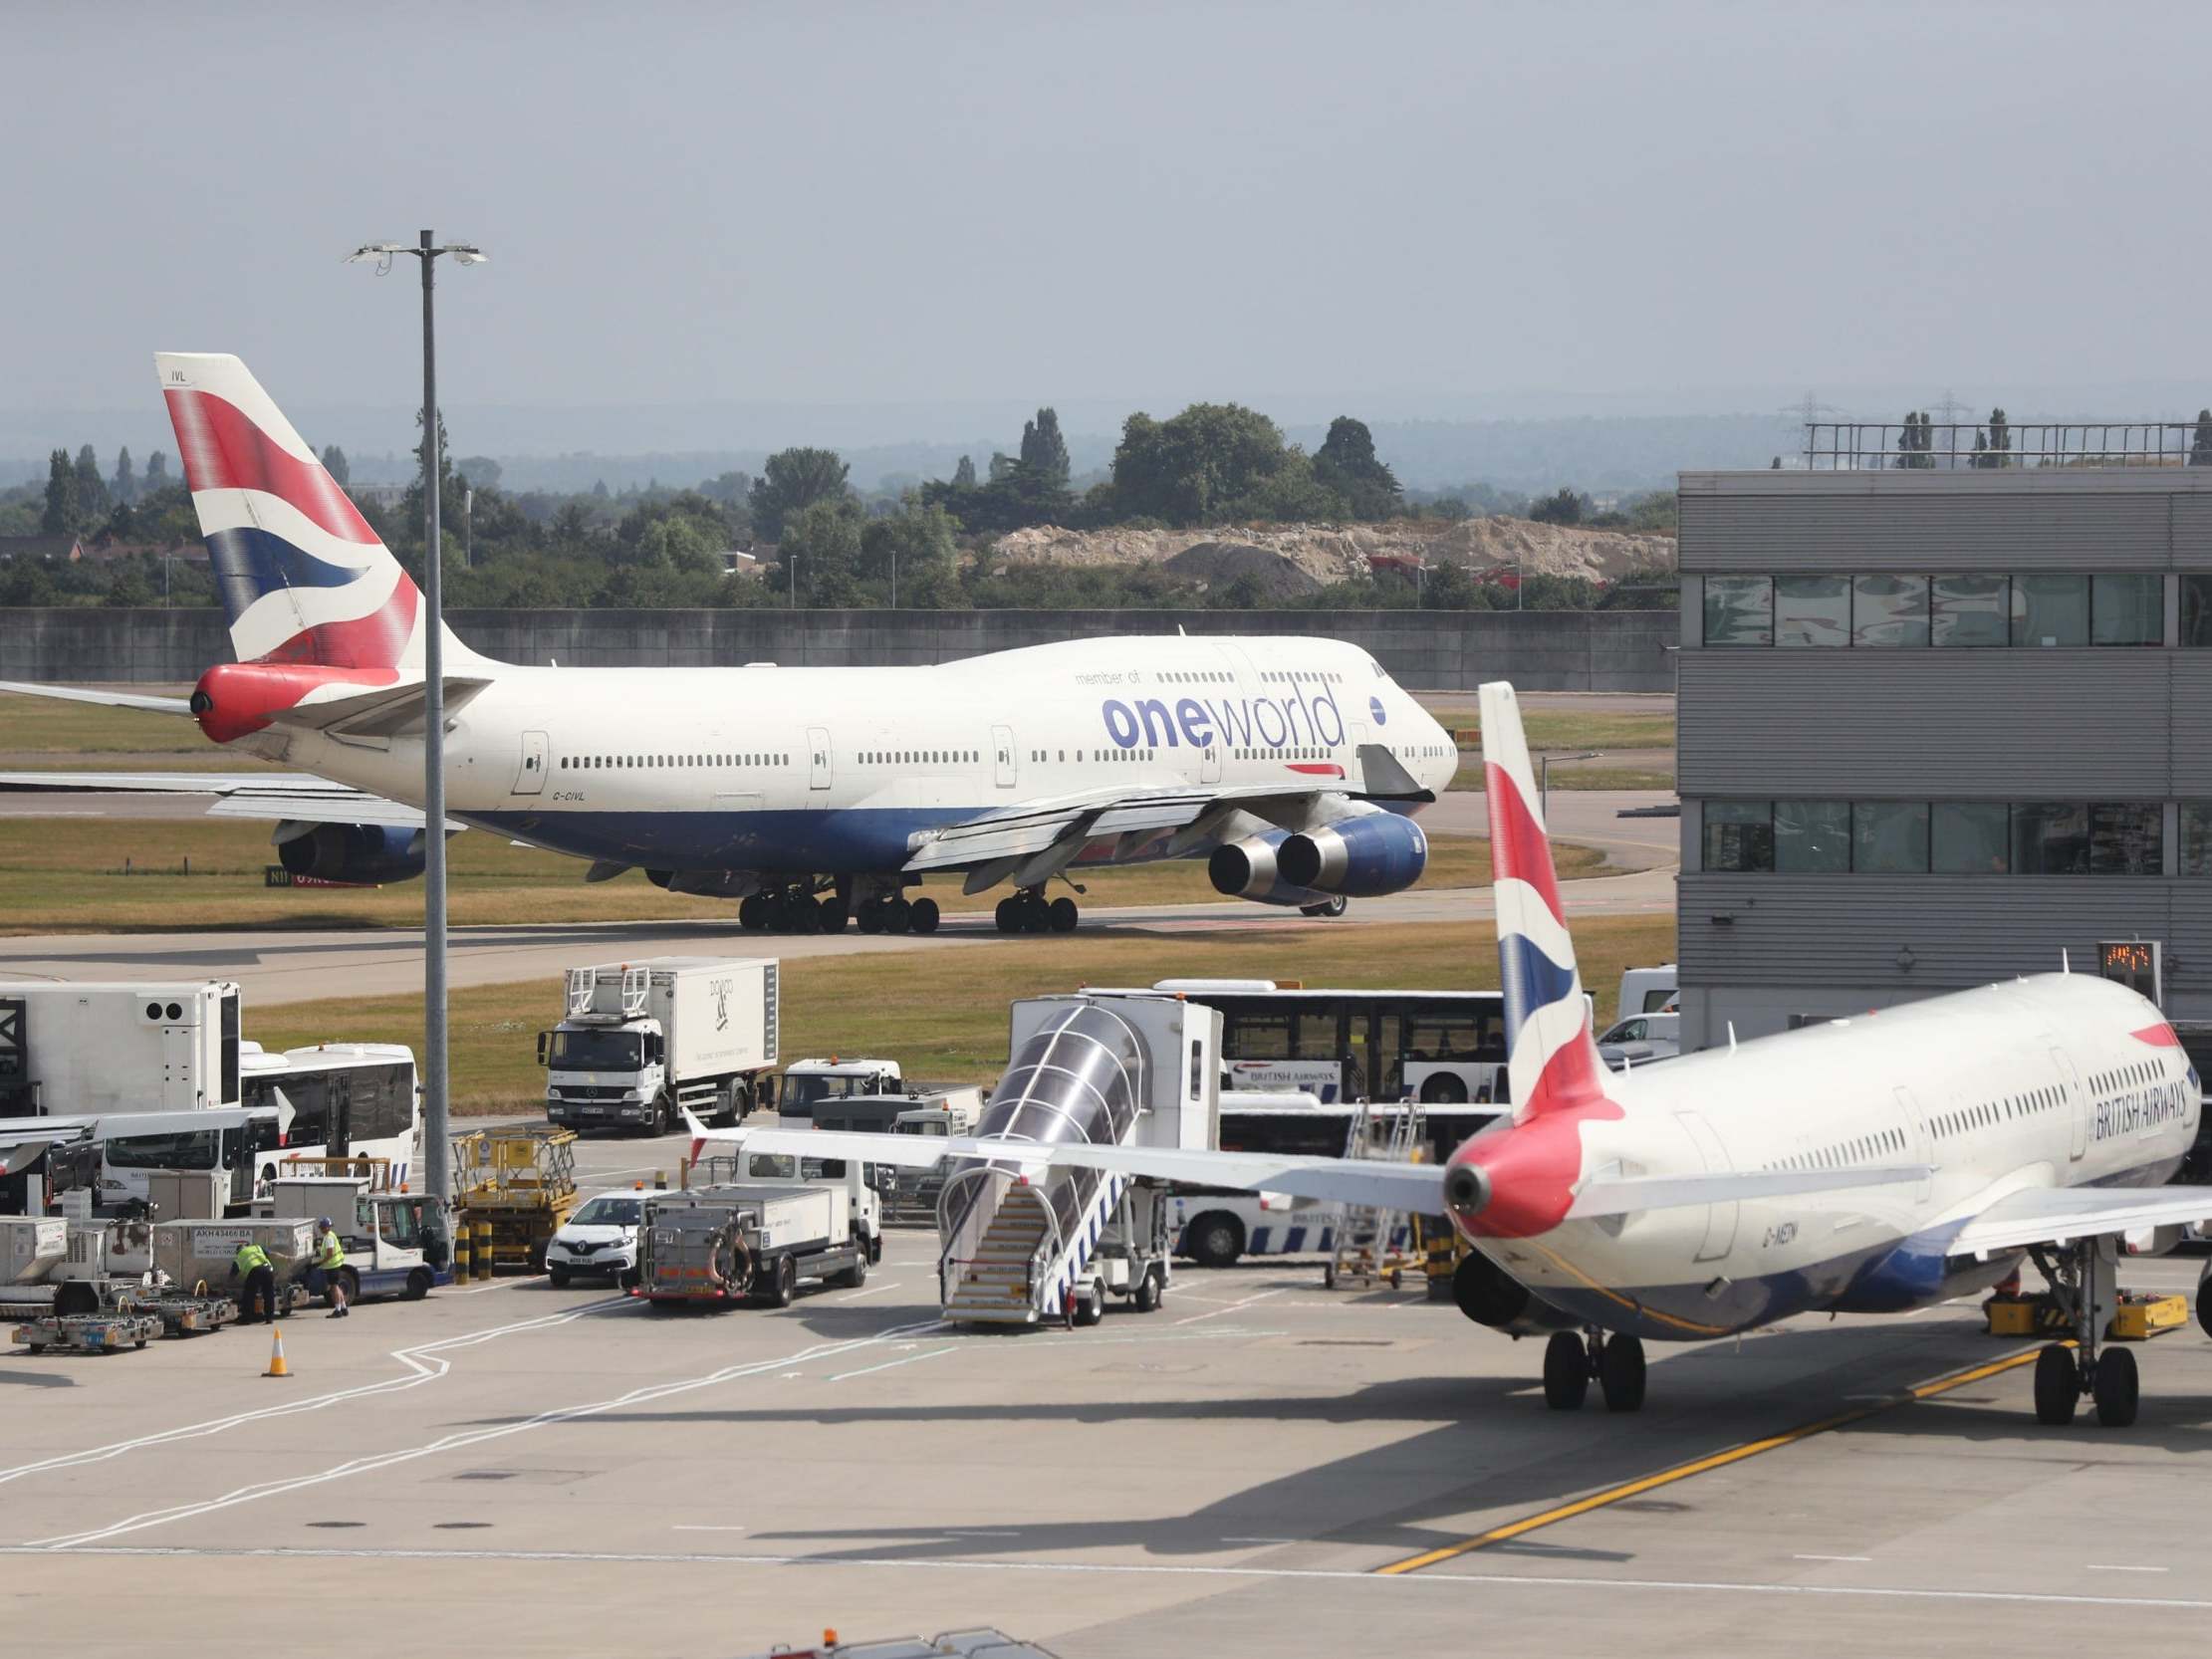 Heathrow strike: Everything you need to know about the now-cancelled industrial action